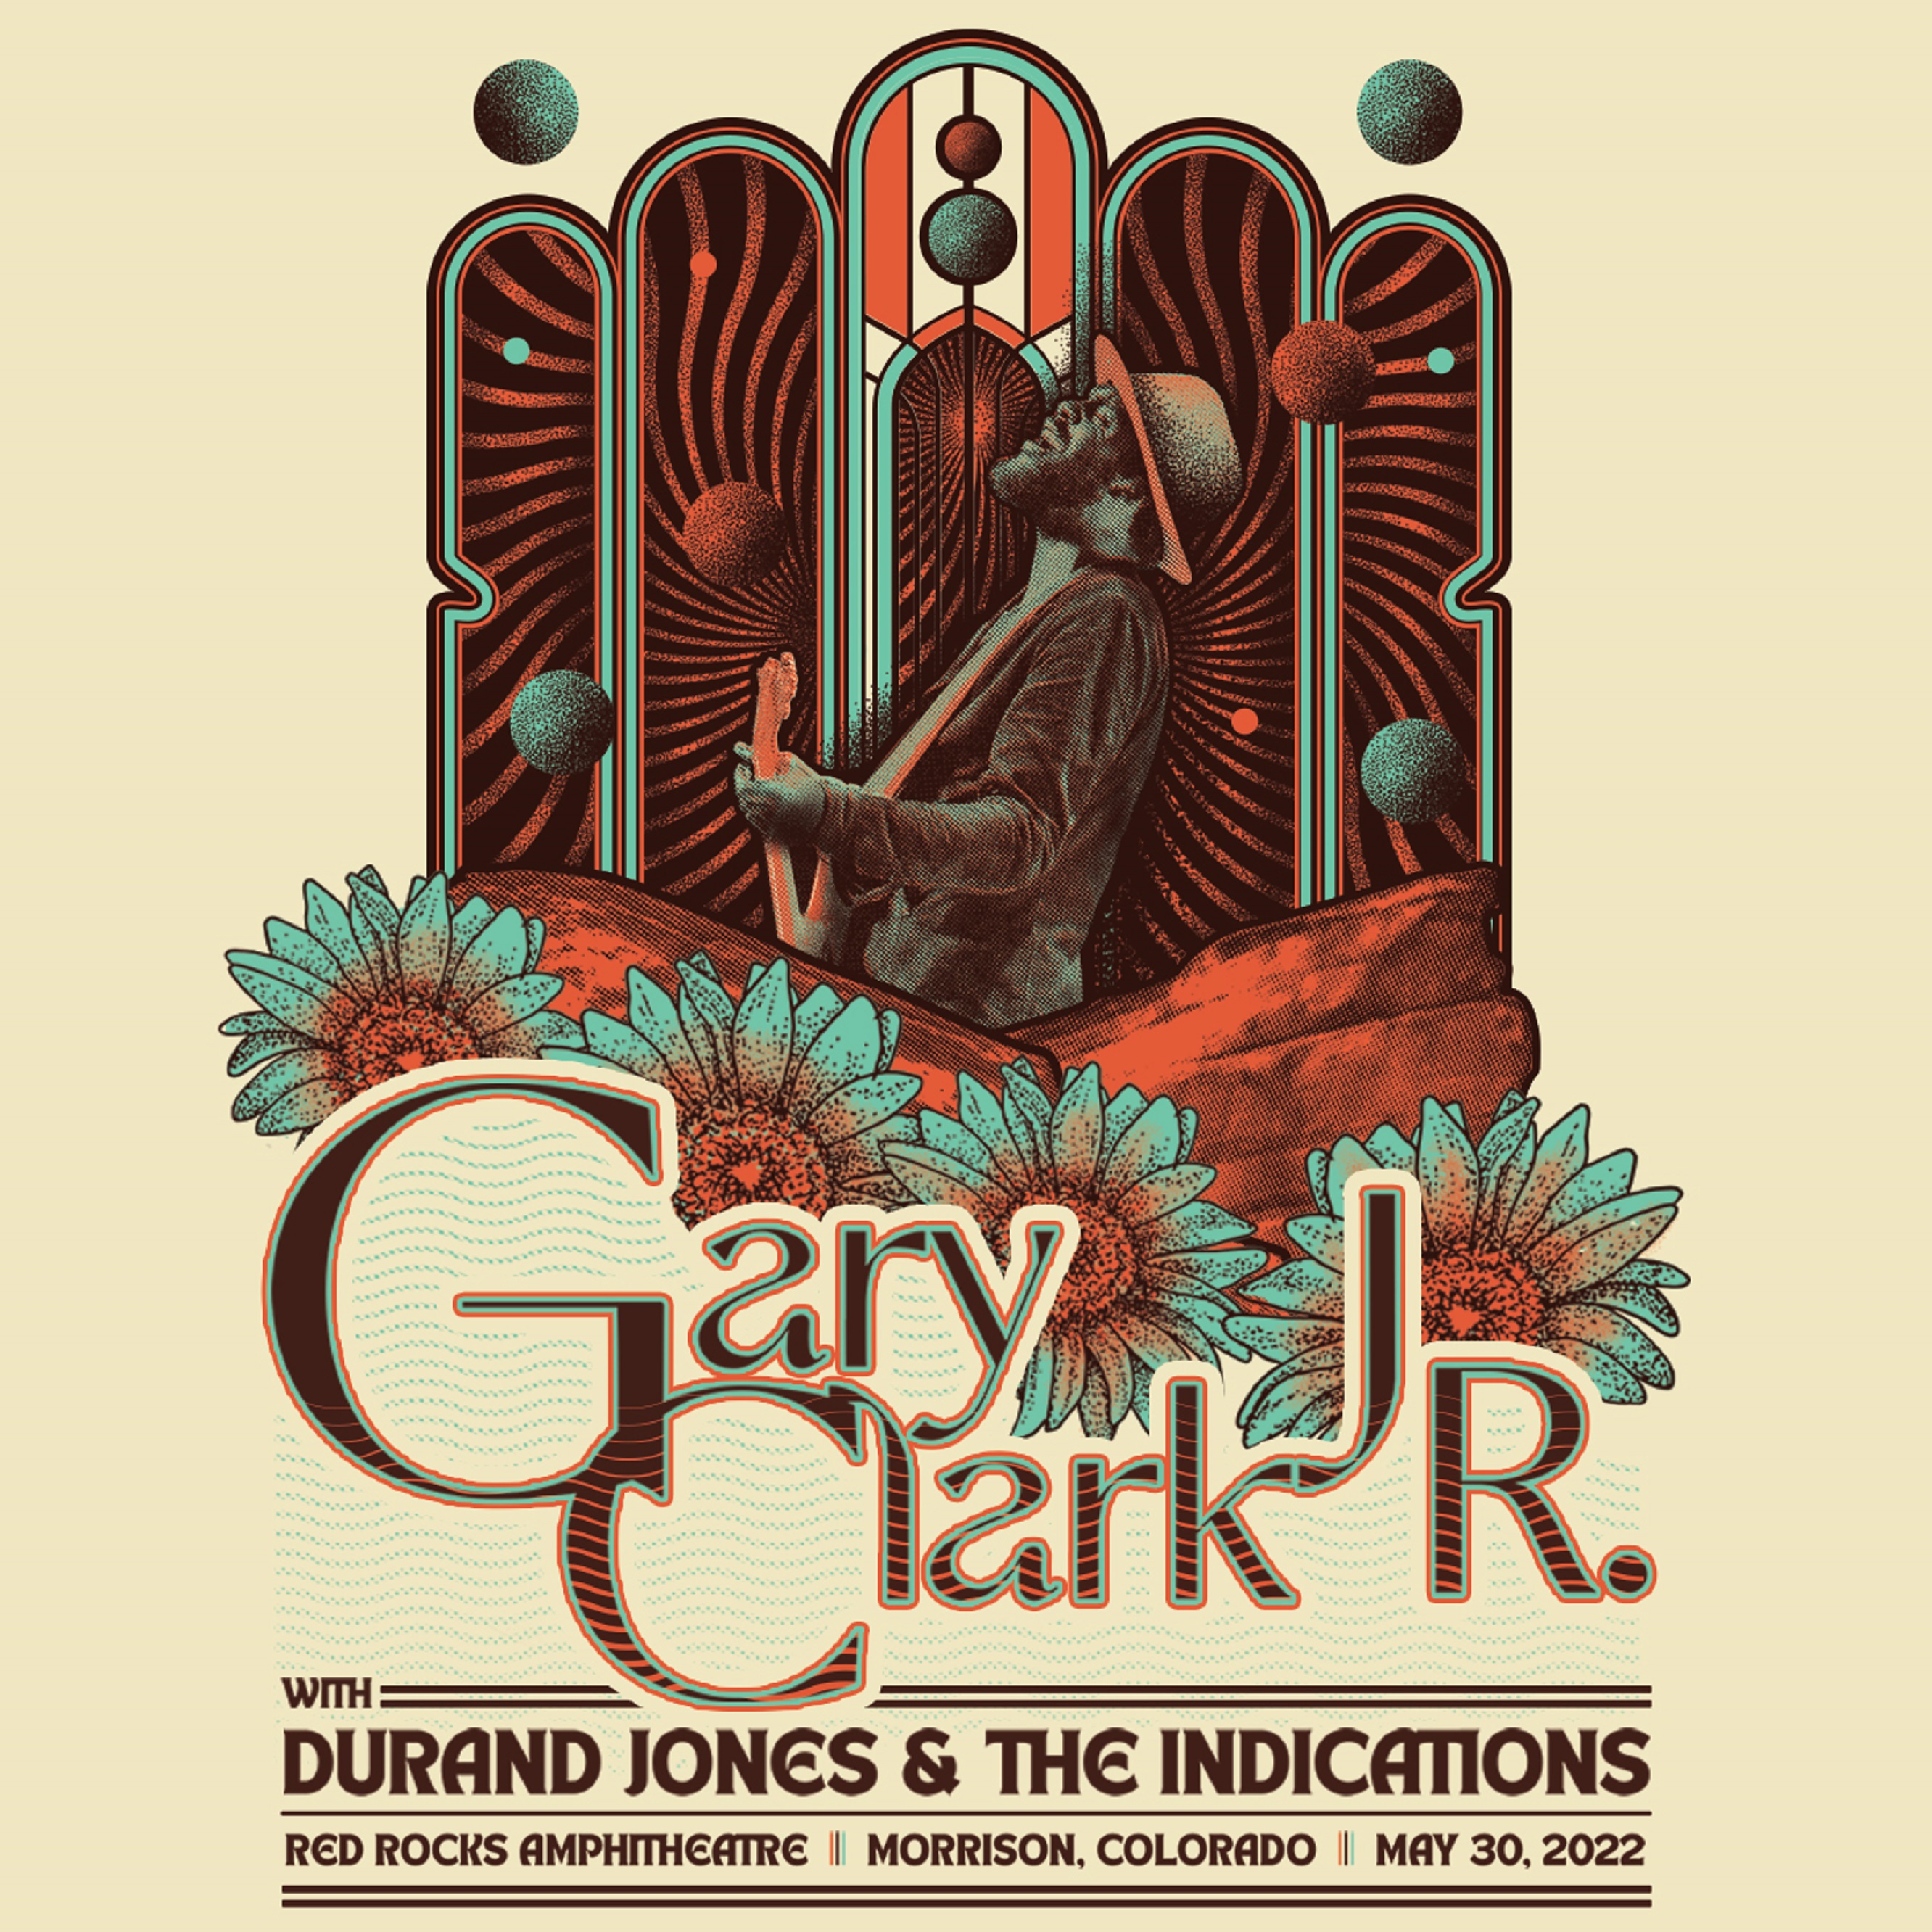 Gary Clark Jr. to play Red Rocks Amphitheatre May 30th, 2022